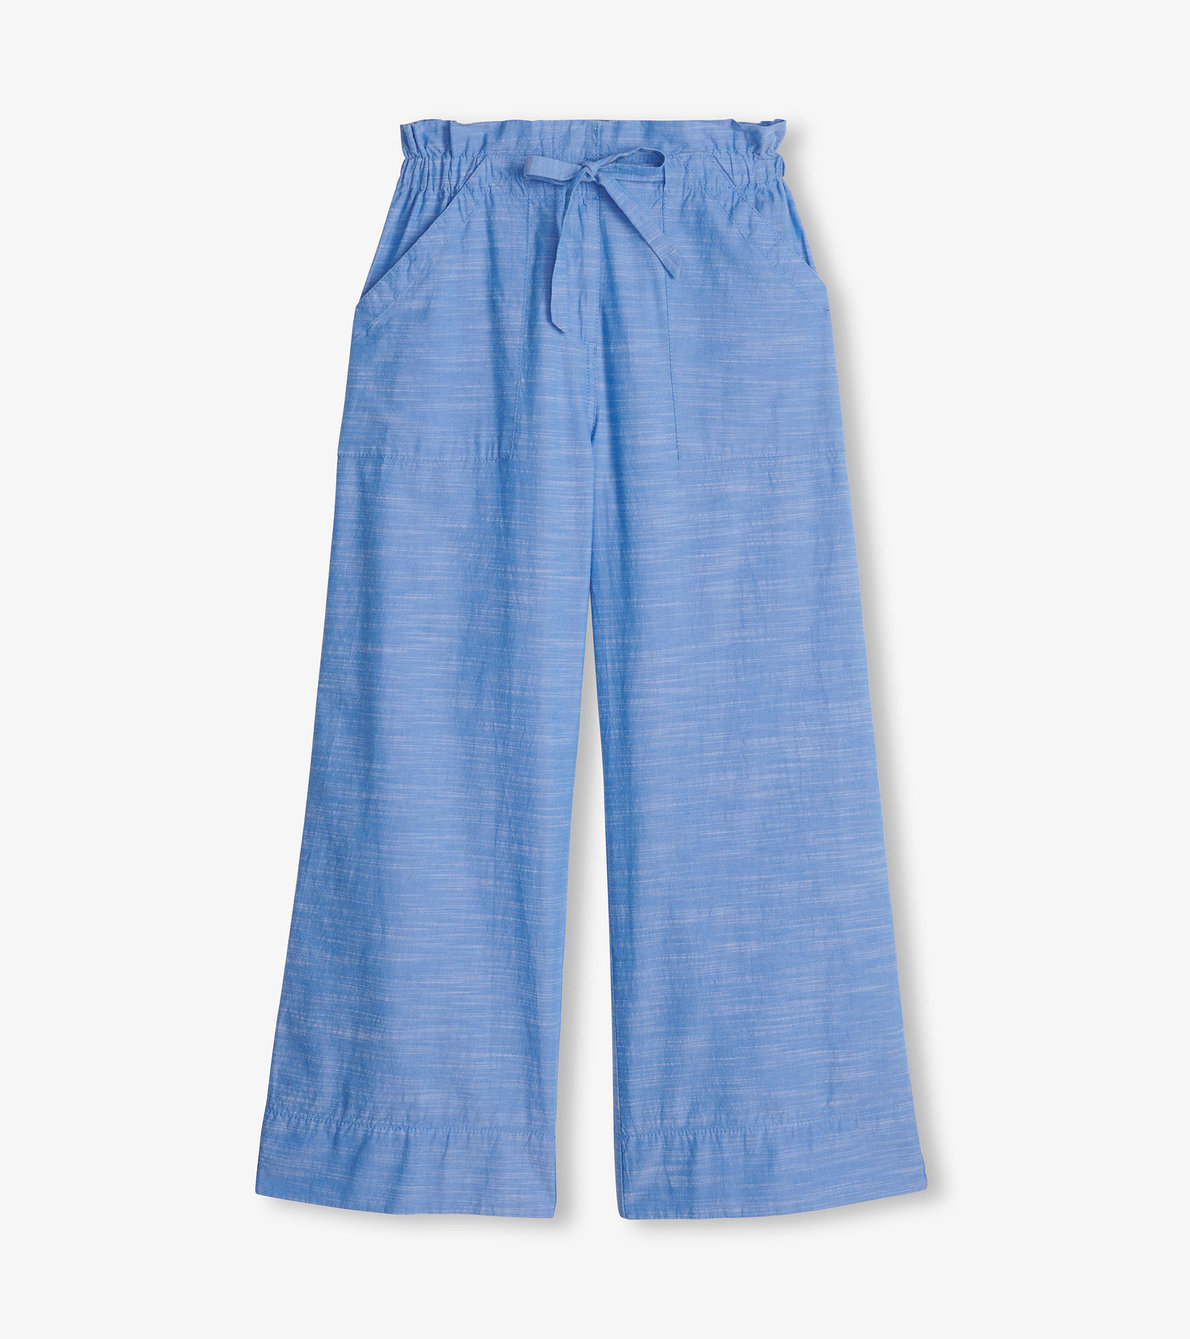 View larger image of Tie Front Pants - Chambray